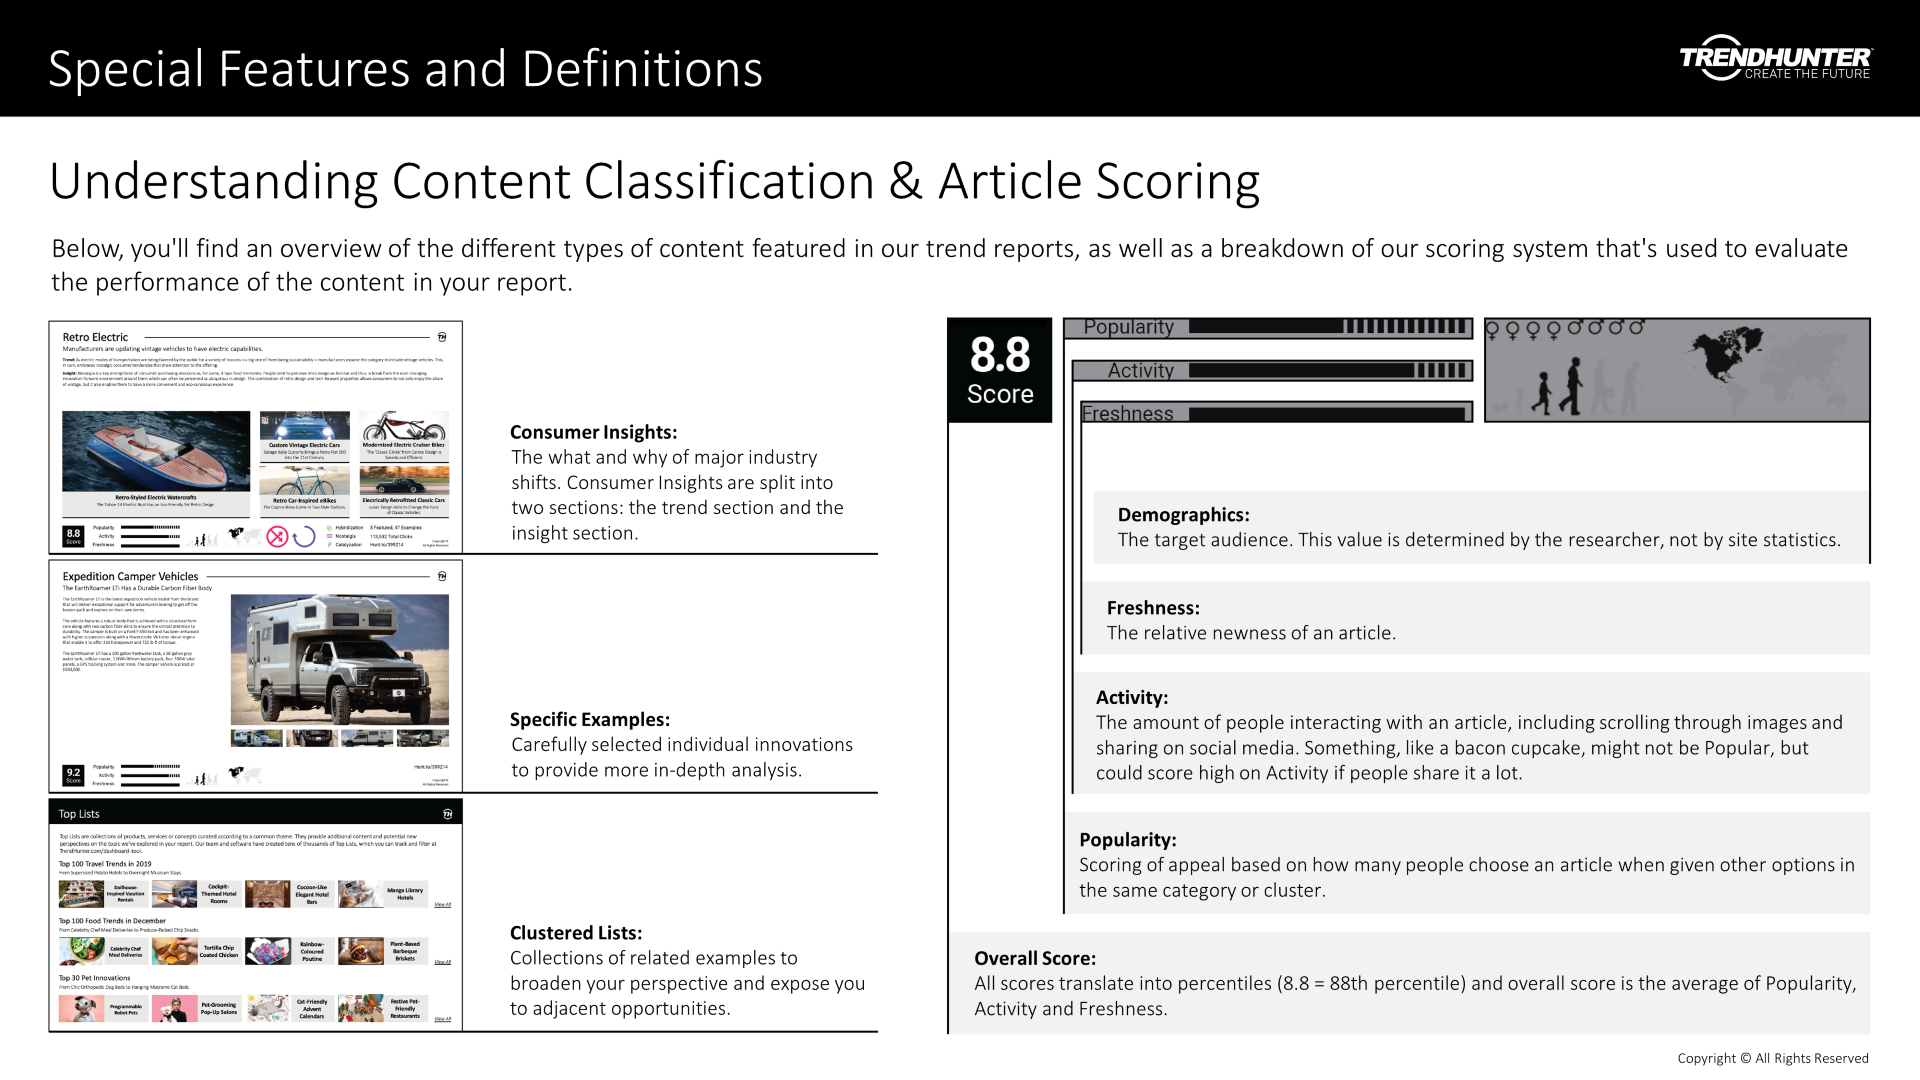 Image Slide: Special Features and Definitions